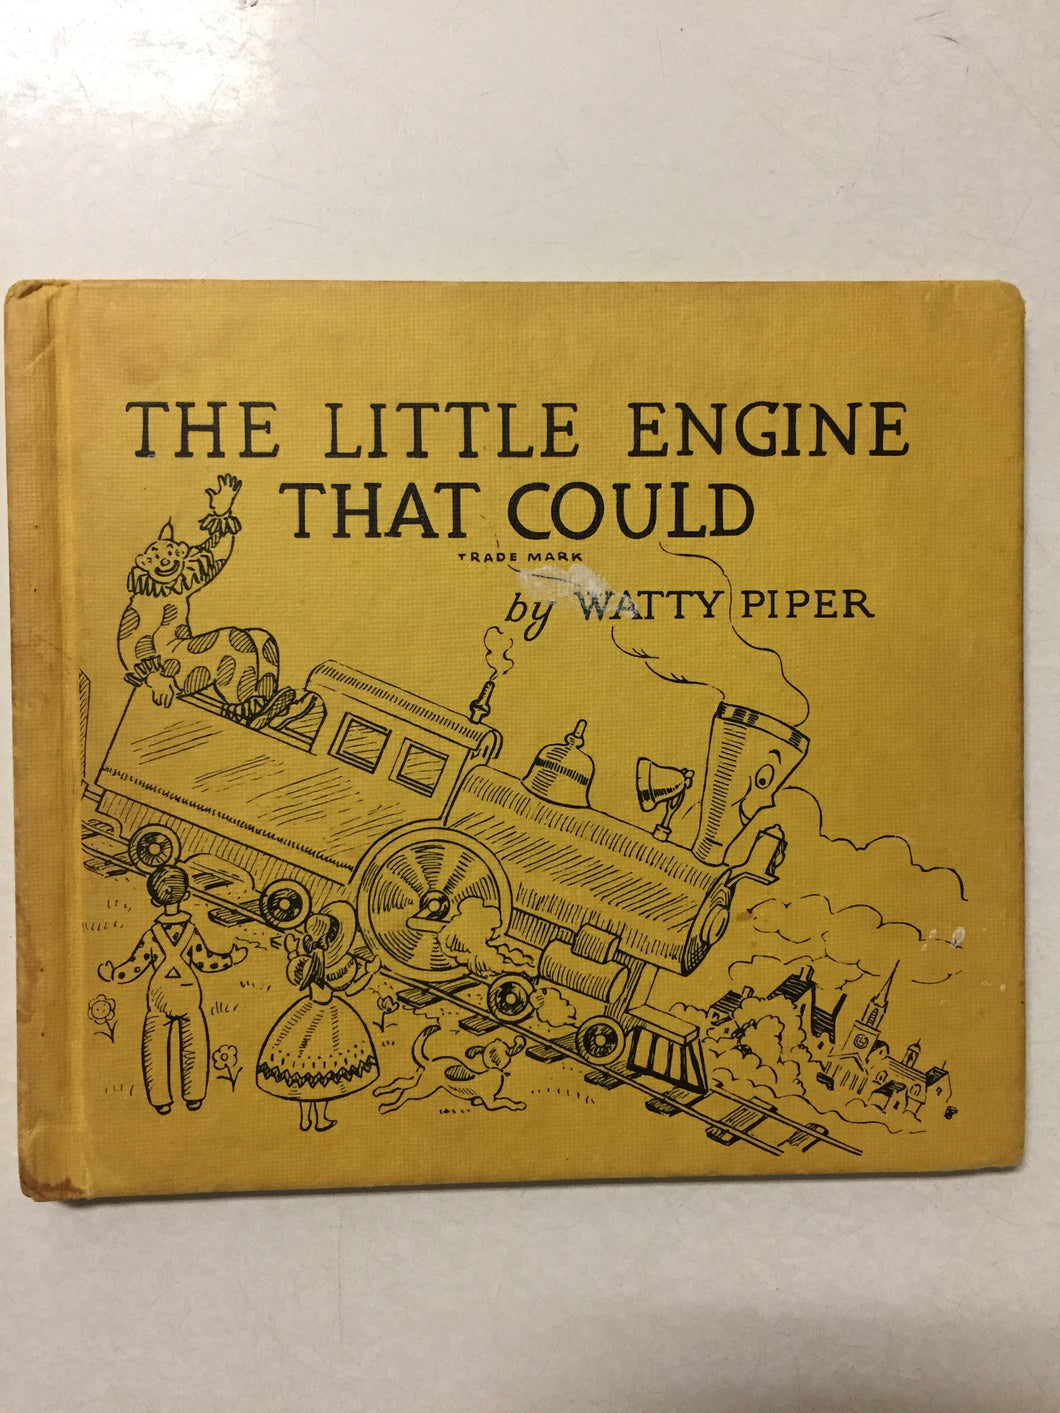 The Little Engine That Could - Slick Cat Books 